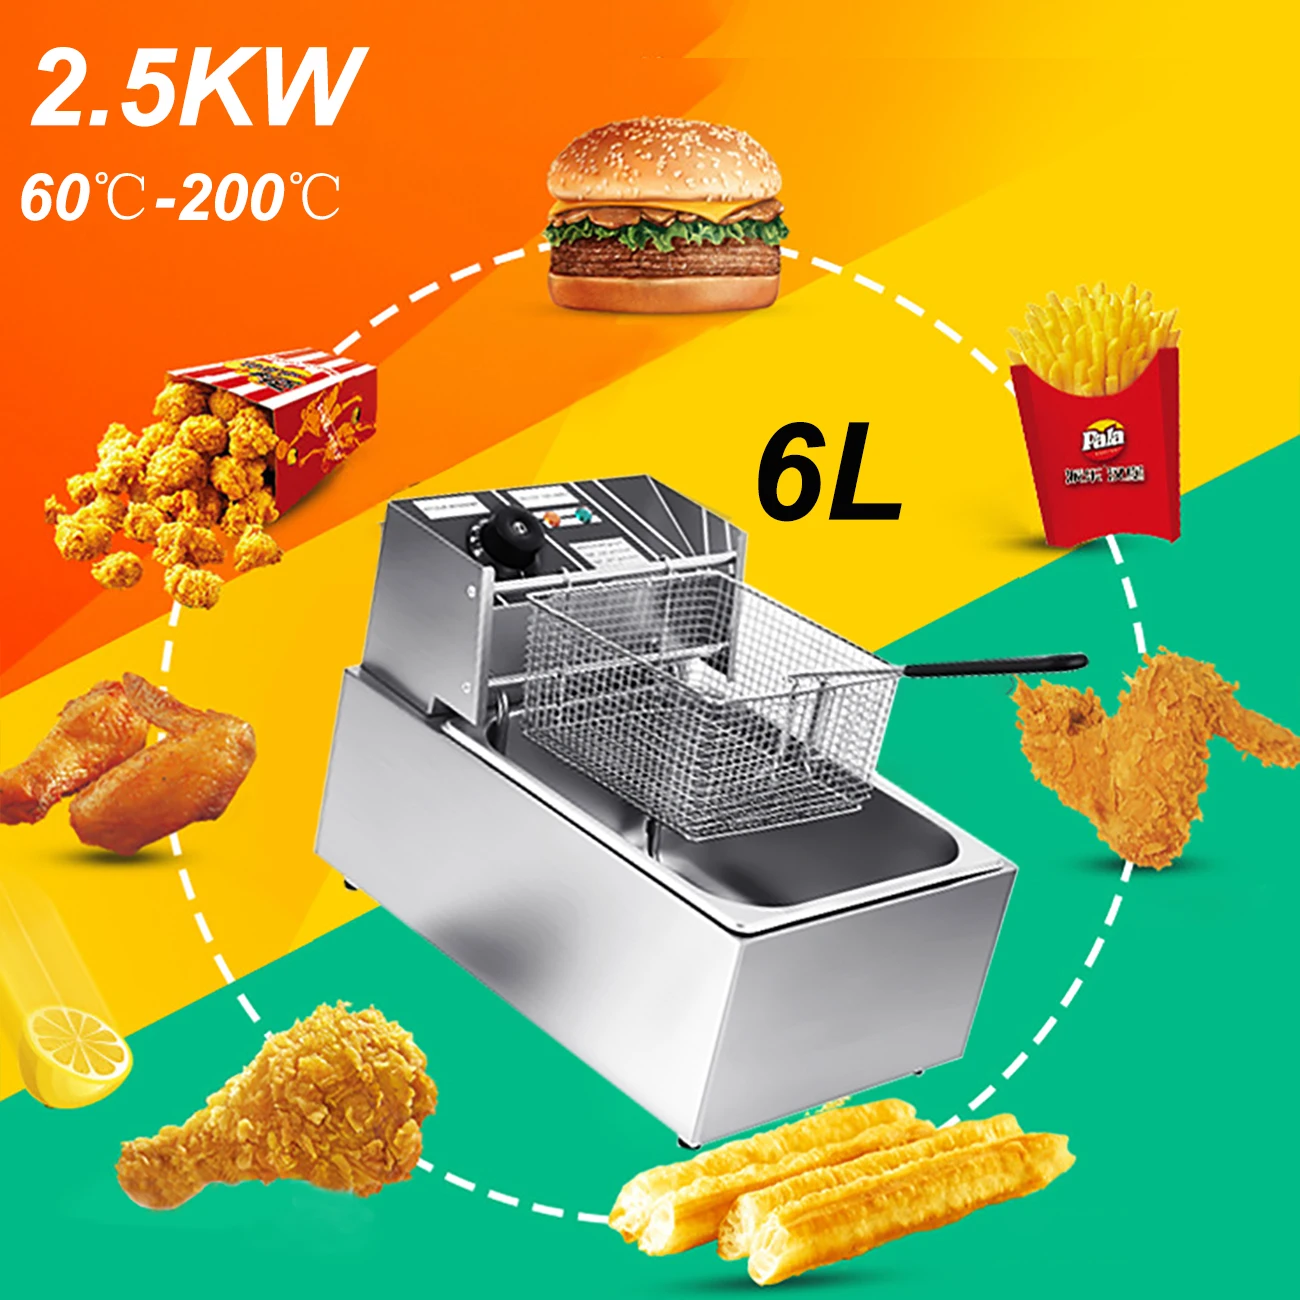 

Honhill Commercial 6L Oil Cylinder Electric Deep Fryer French Fries Frying Machine Oven Hot Pot Fried Chicken Grill EU US Plug